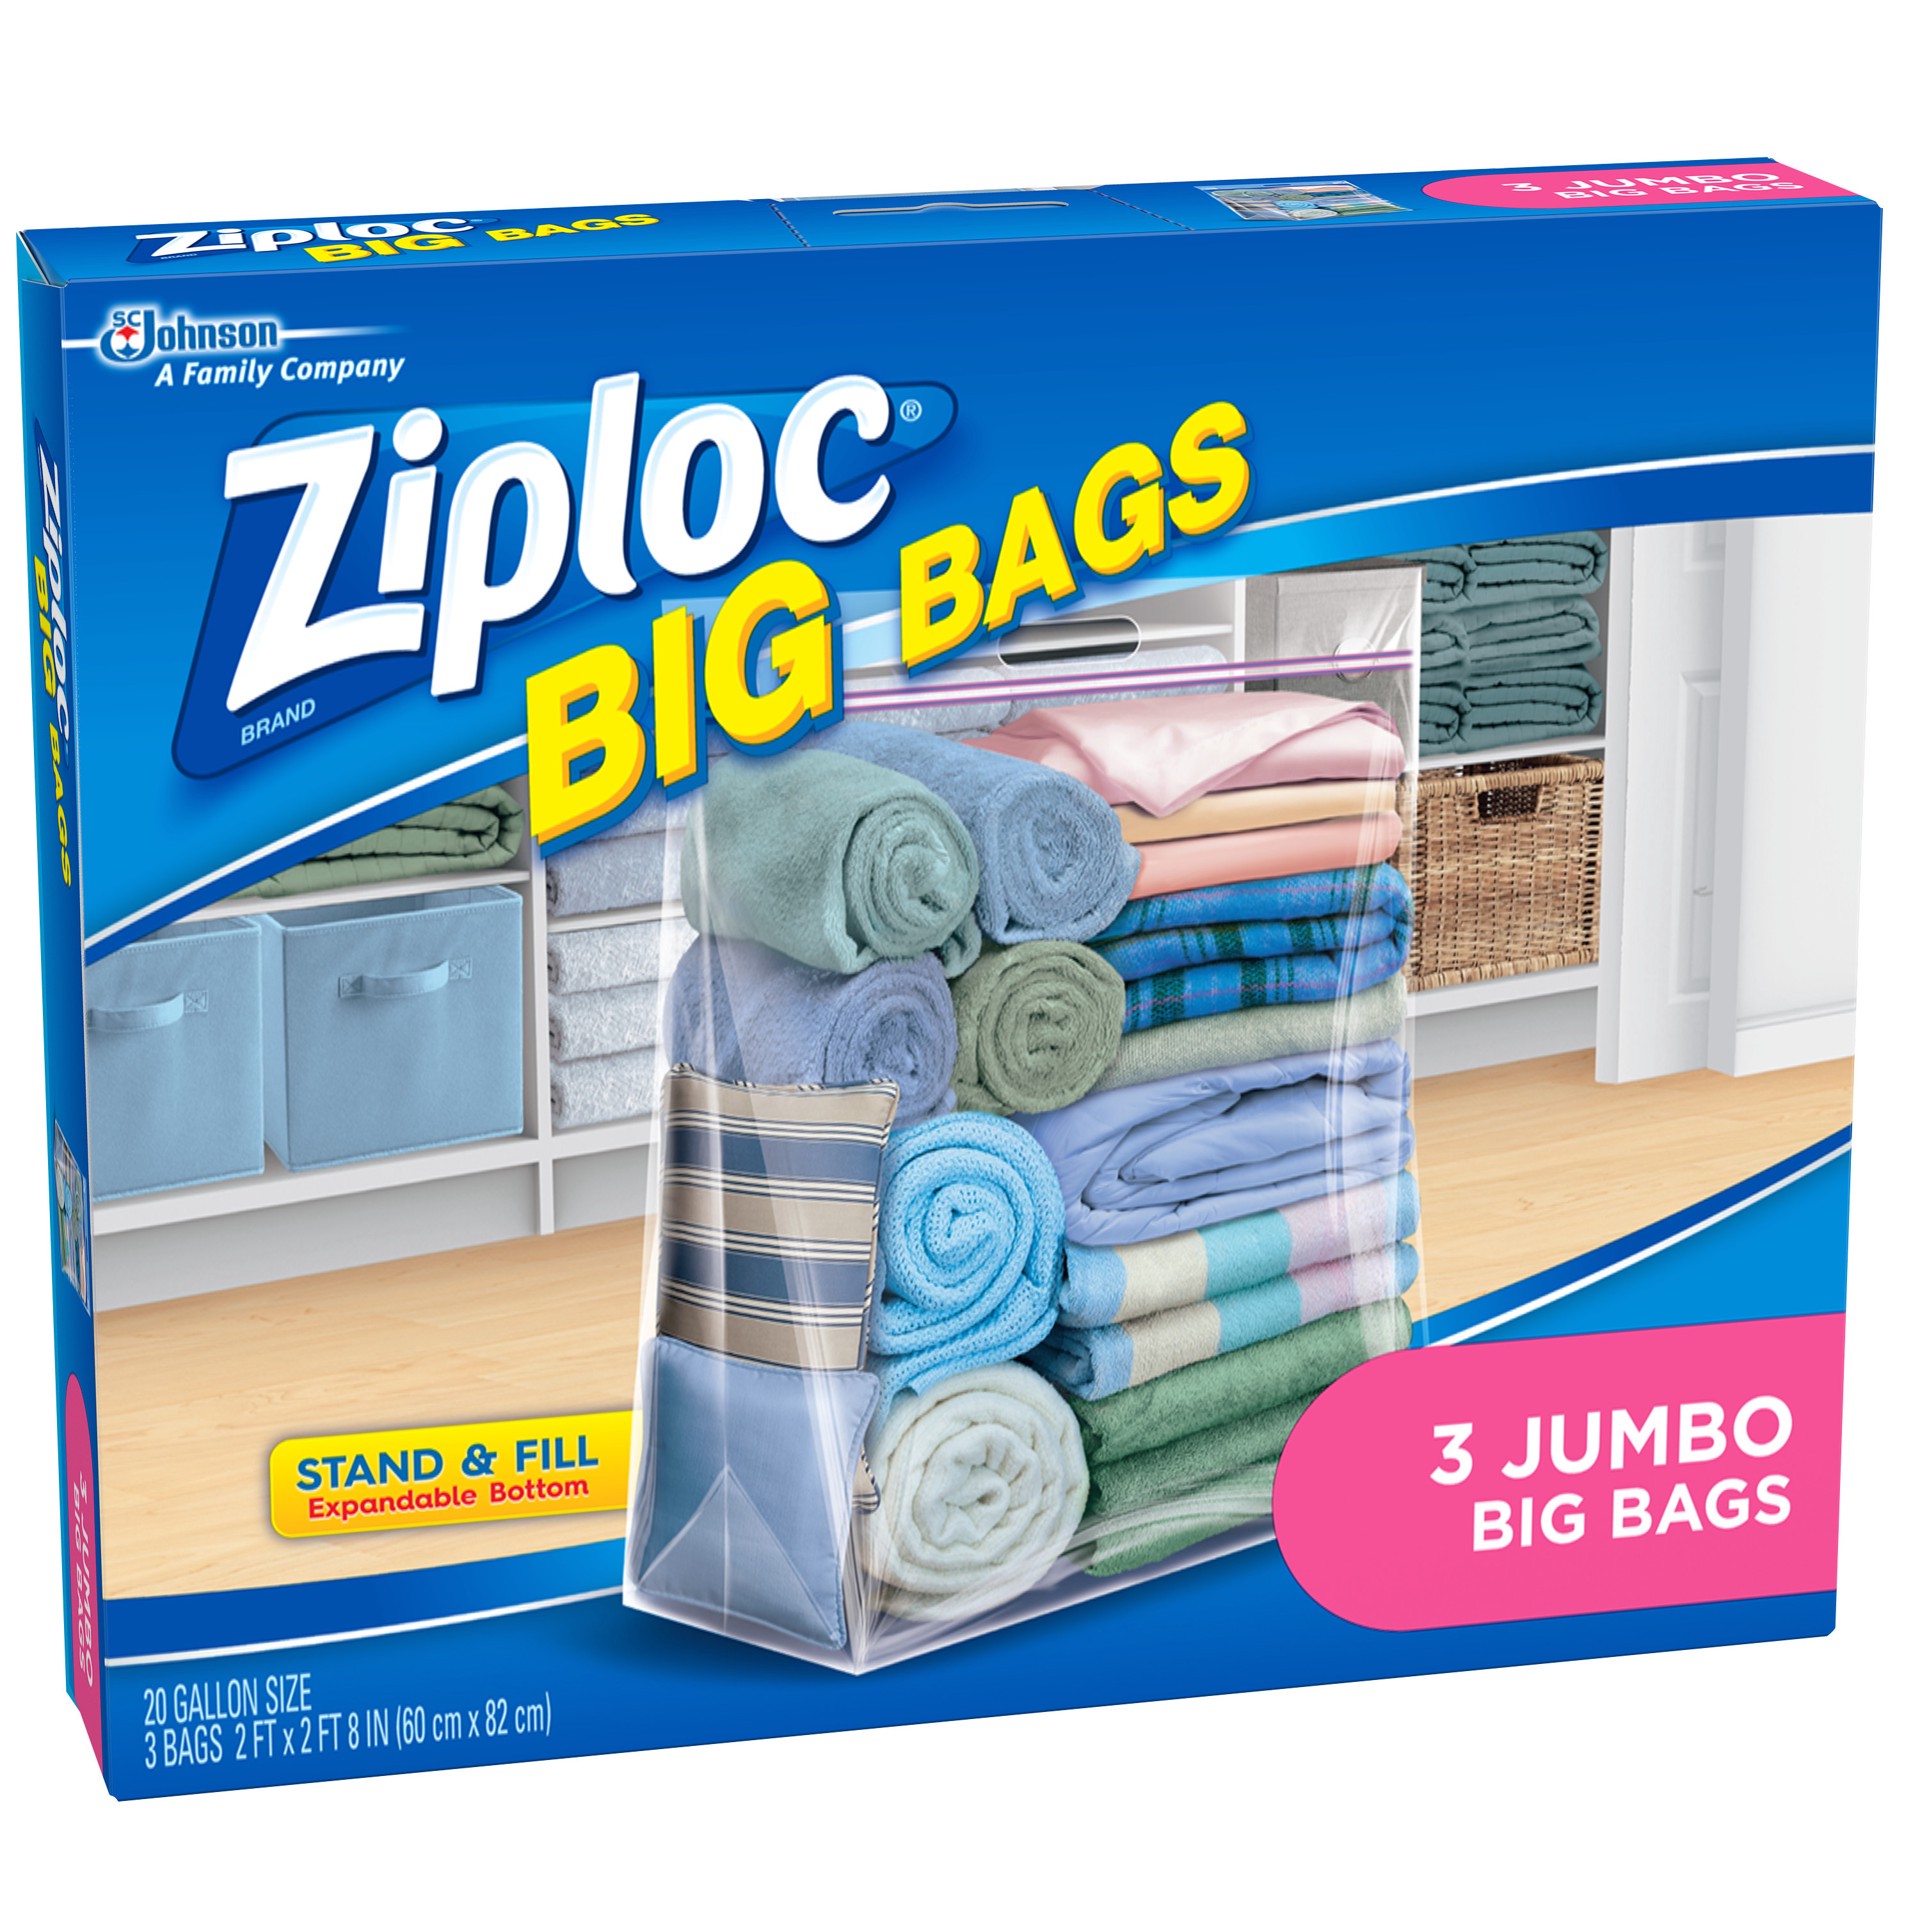 slide 5 of 5, Ziploc Big Bags, Jumbo, Secure Double Zipper, 3 CT, Expandable Bottom, Heavy-Duty Plastic, Built-In Handles, Flexible Shape to Fit Where Storage Boxes Can't, 3 ct